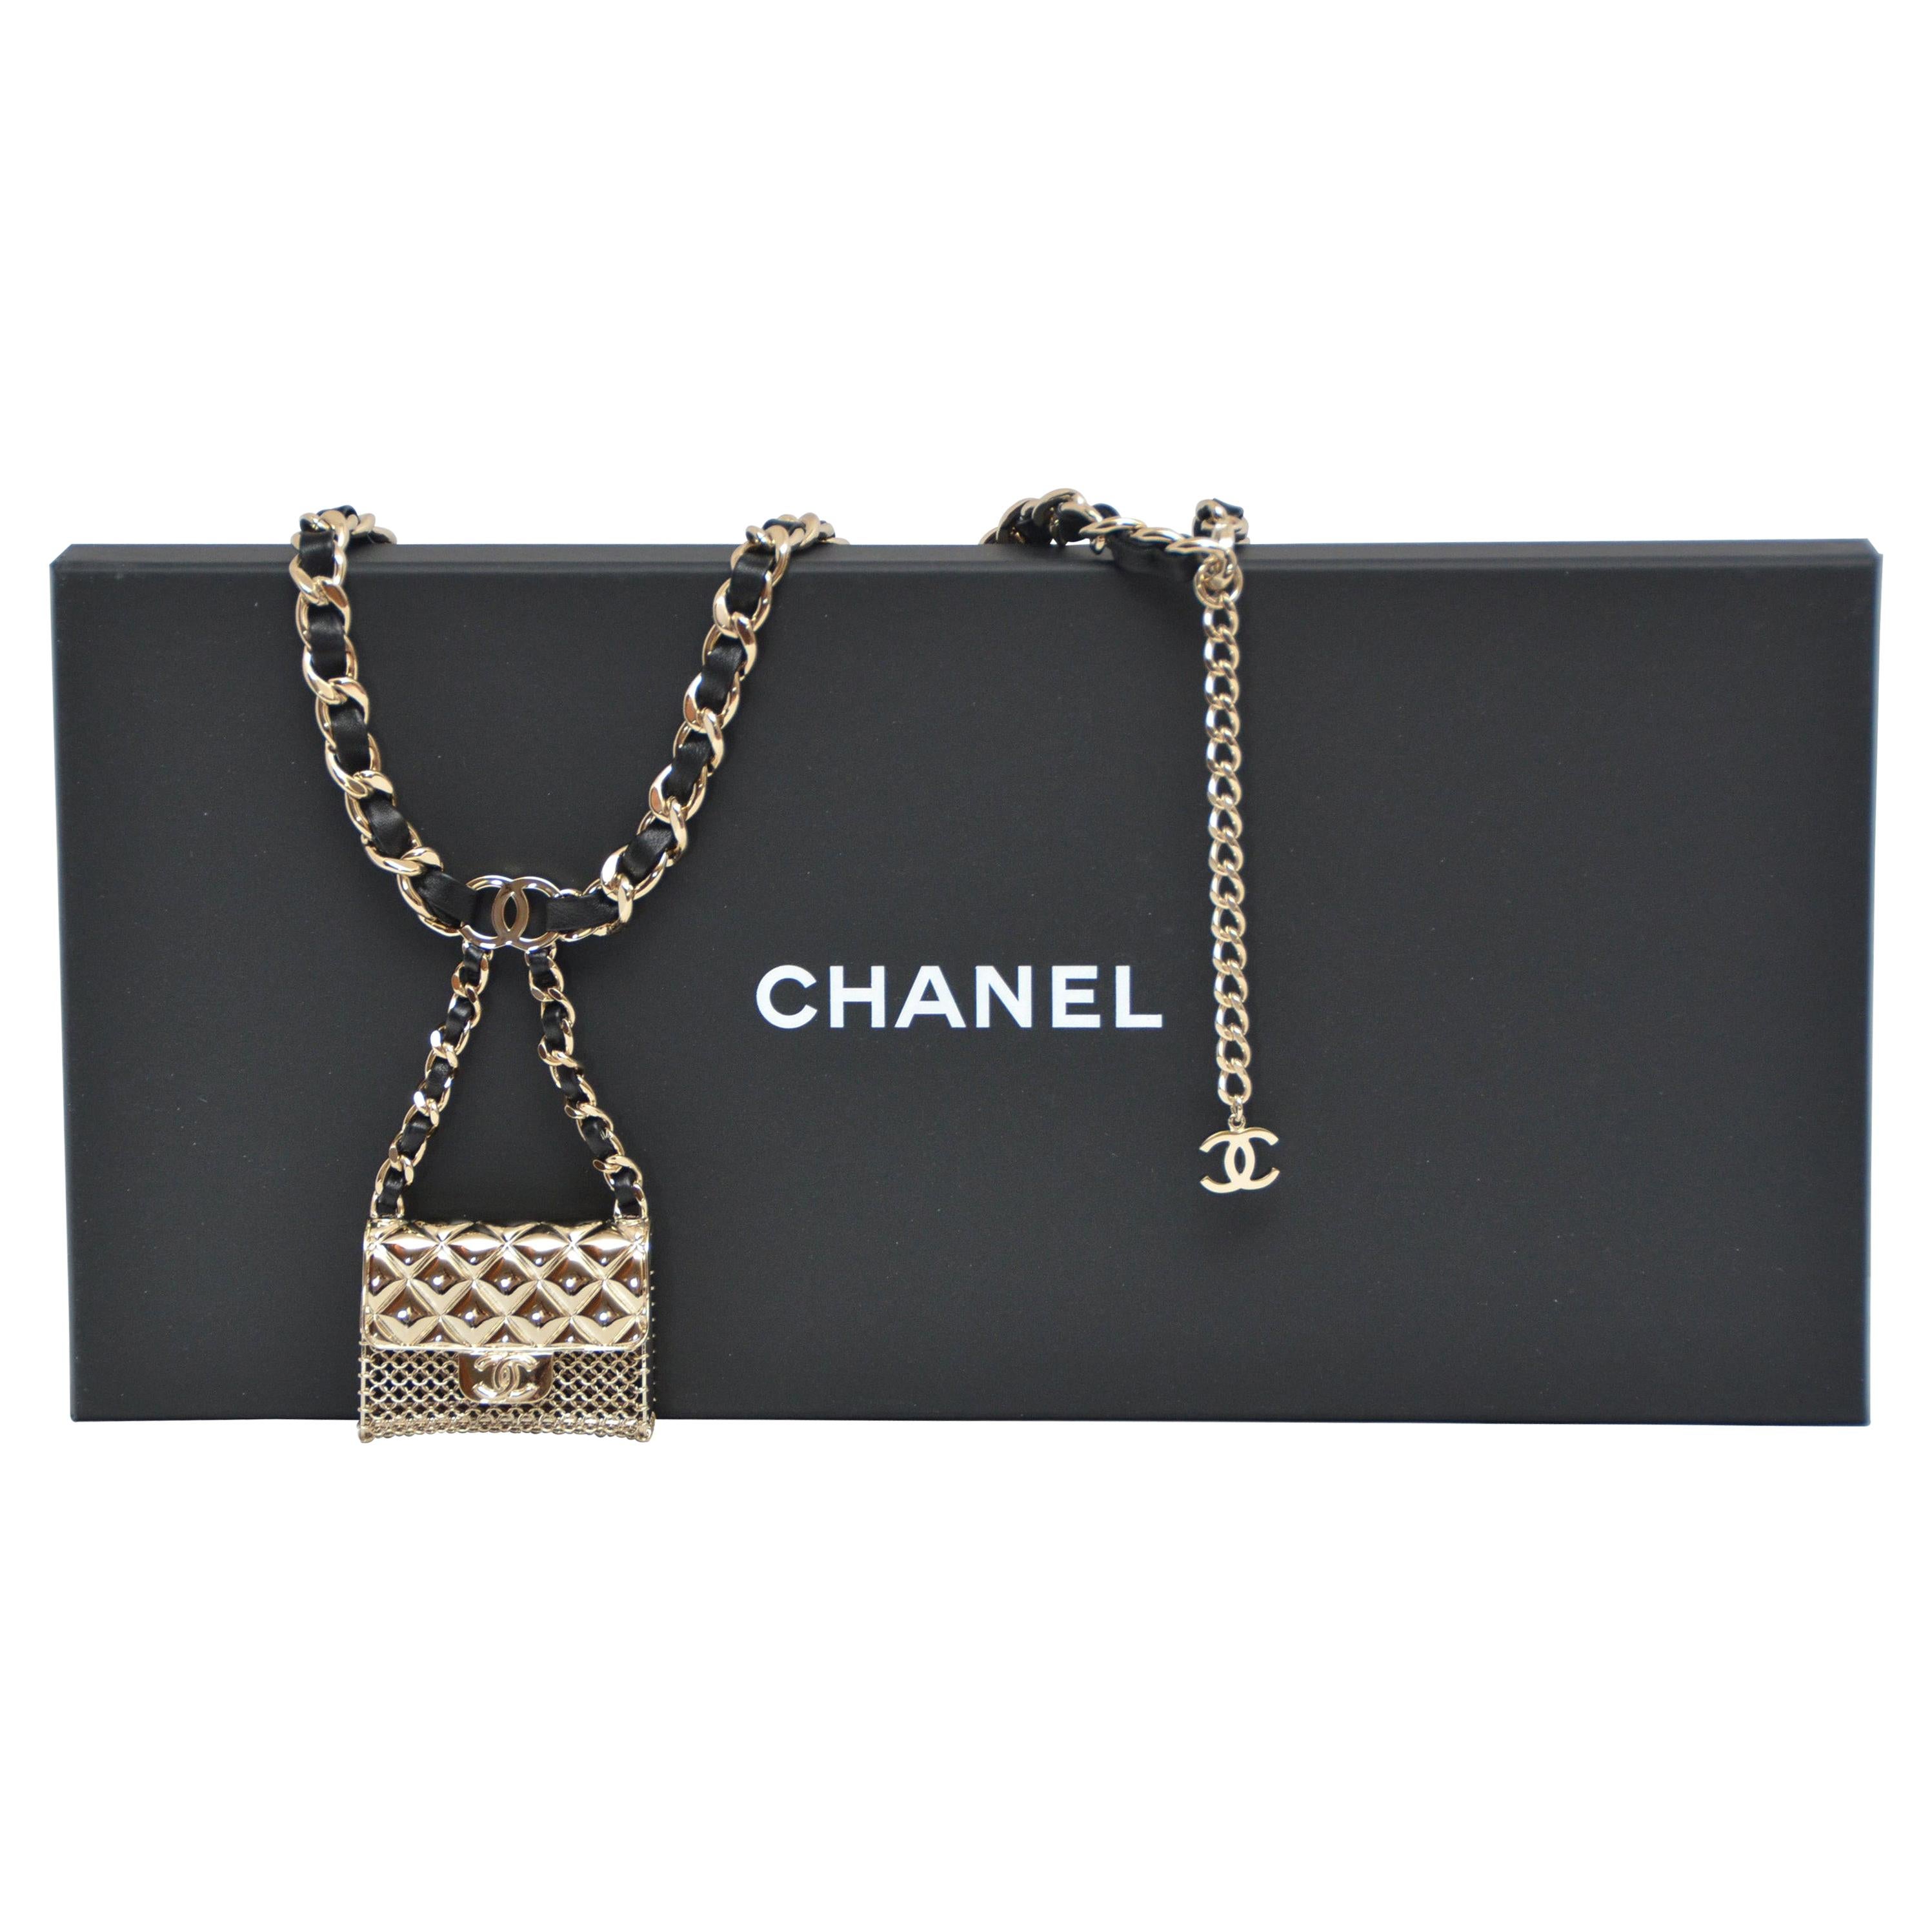 Accessorize with a Chanel Belt or Chanel Belt Bag